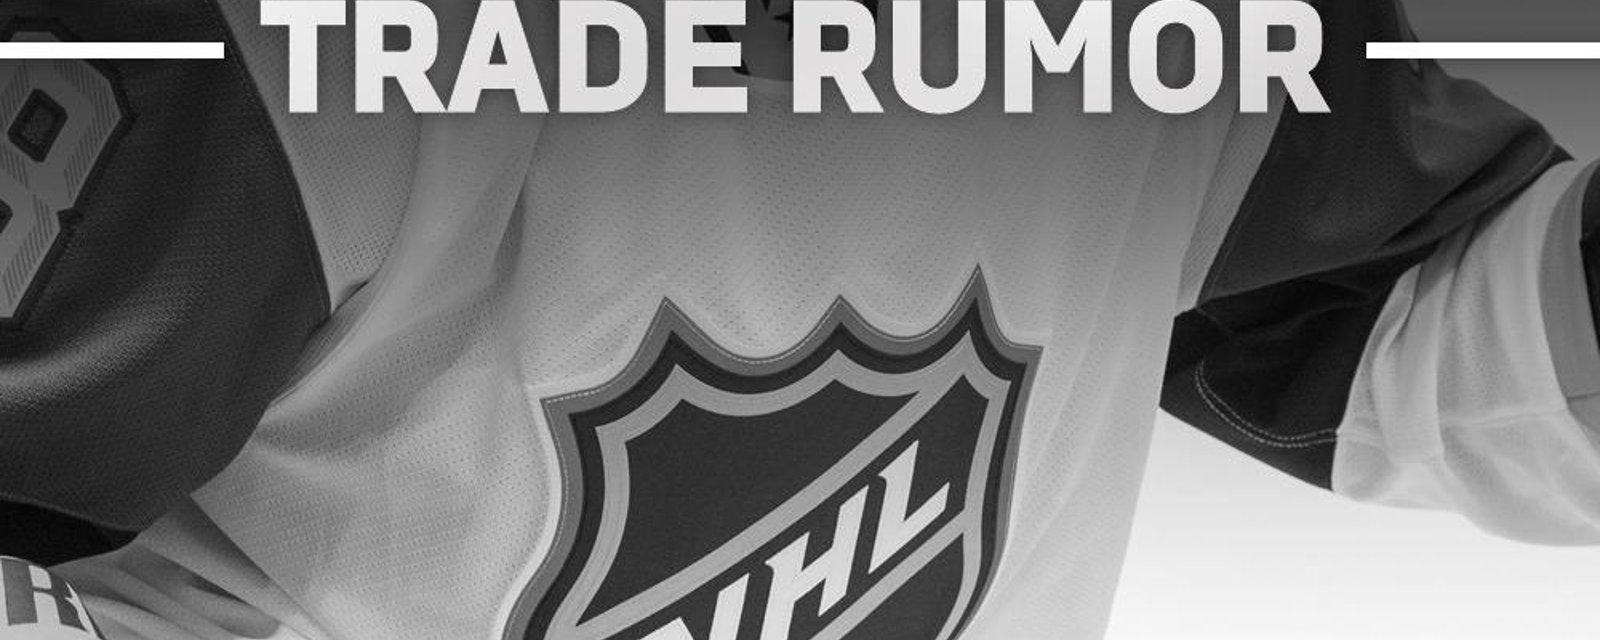 Rumor: Multiple defensemen could be traded before the end of the World Cup.